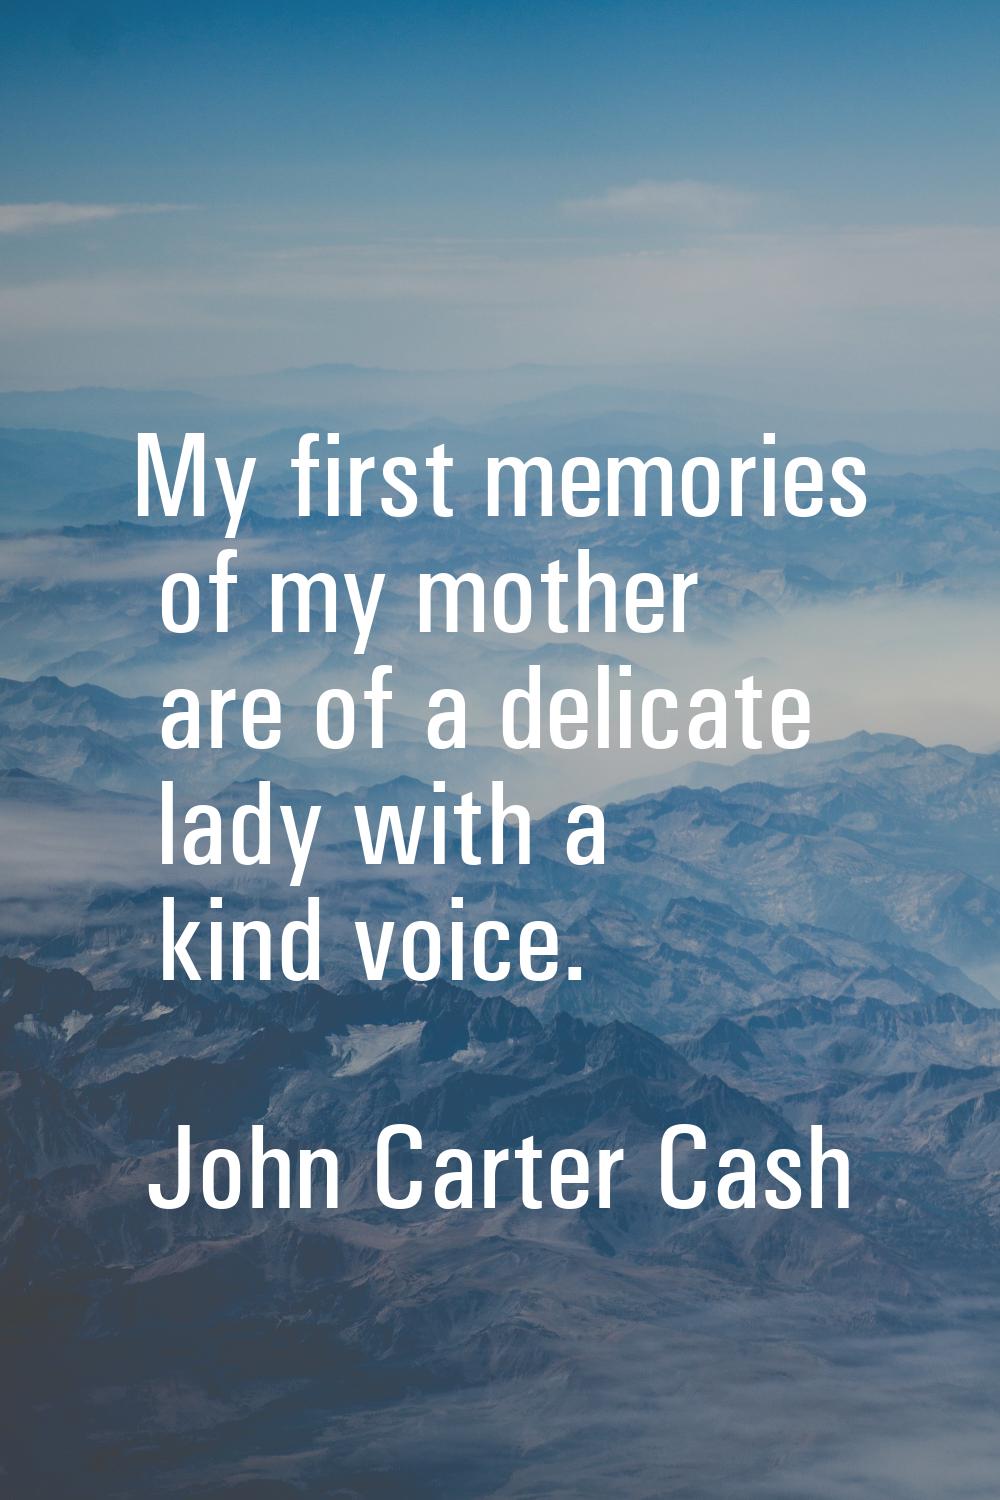 My first memories of my mother are of a delicate lady with a kind voice.